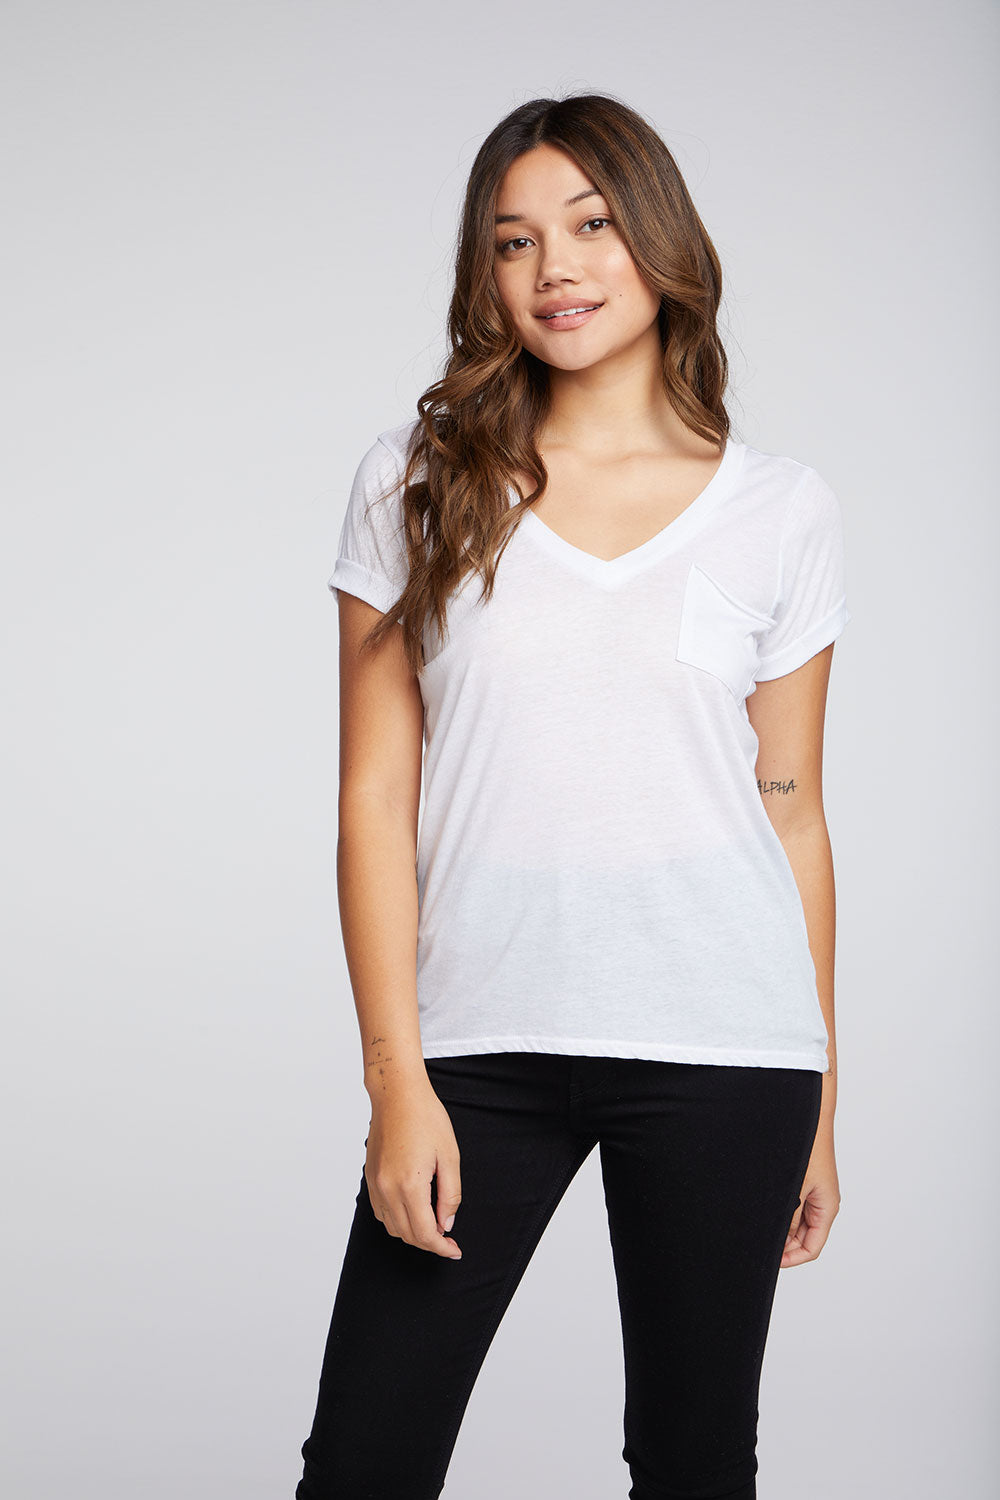 Recycled Vintage Jersey Double V Hi Lo Pocket Tee with Rolled Sleeves WOMENS chaserbrand